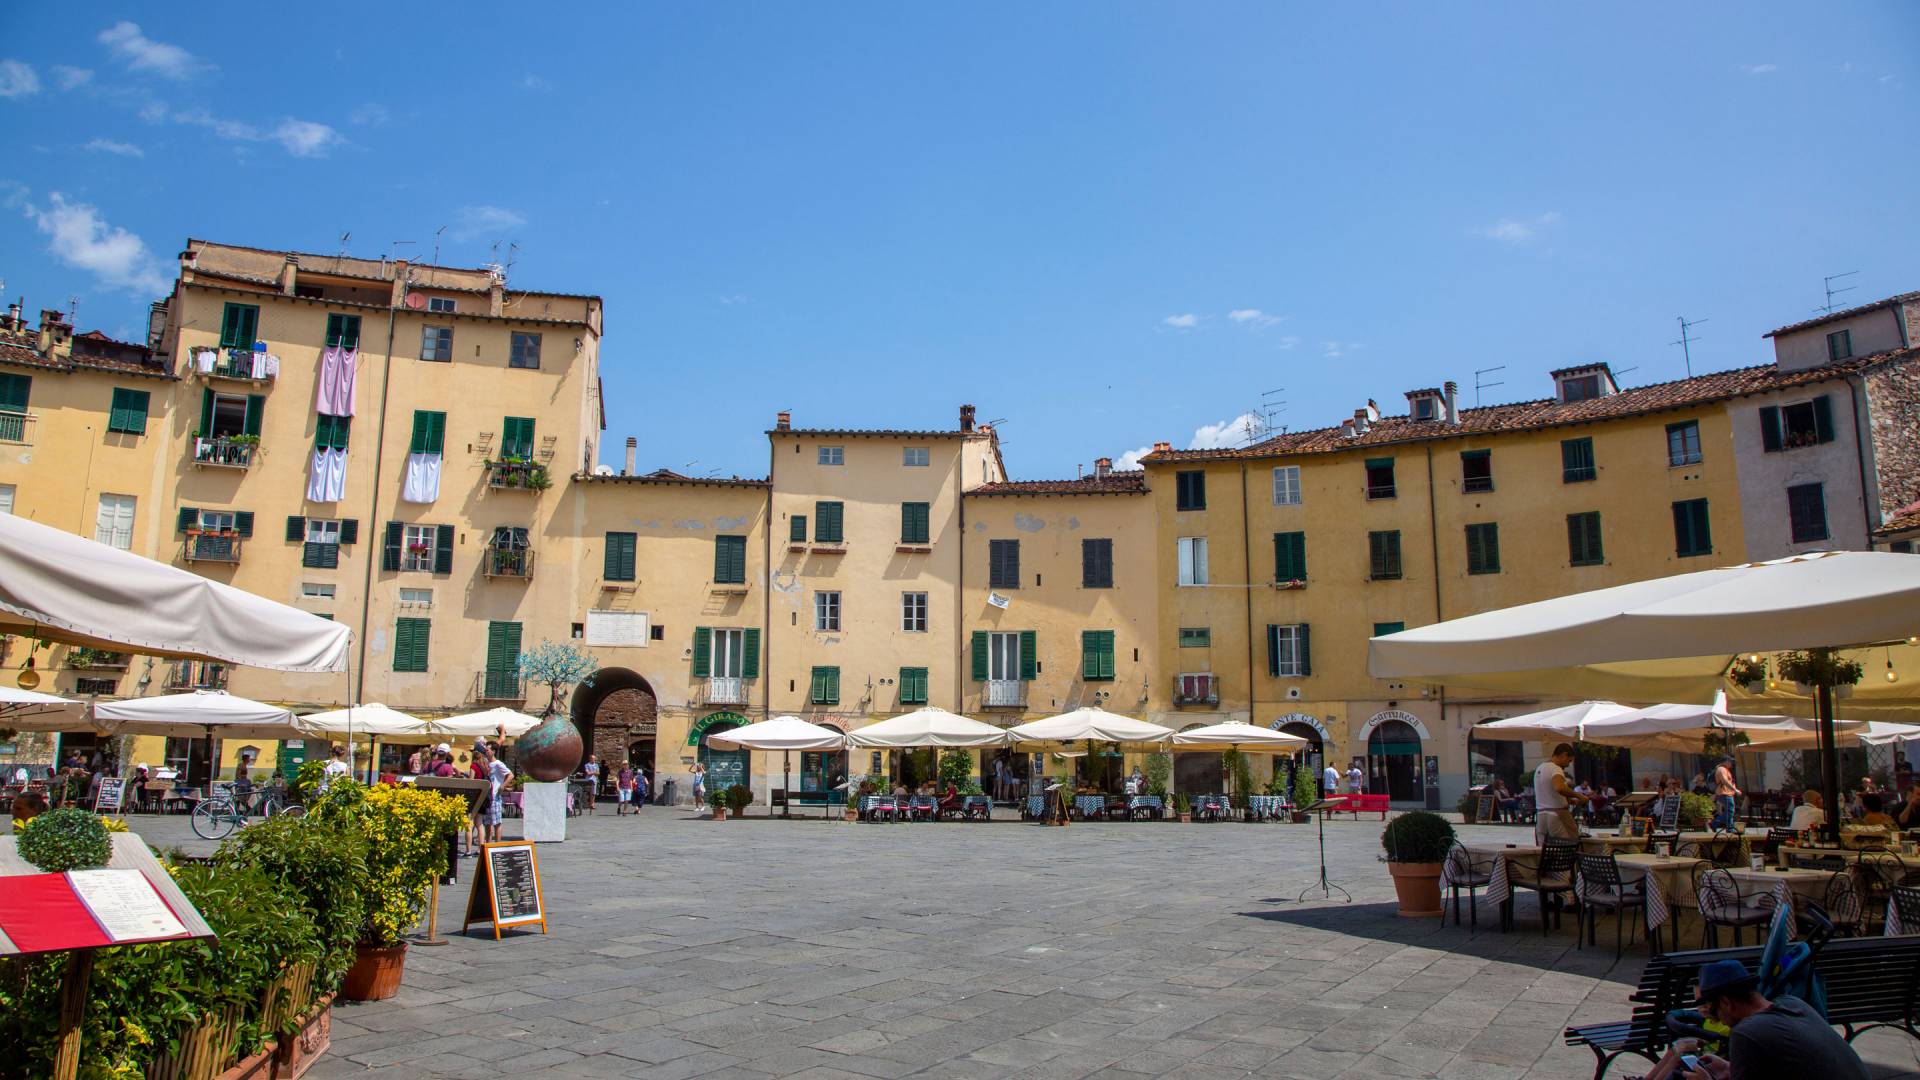 Square in Lucca surrounded by buildings